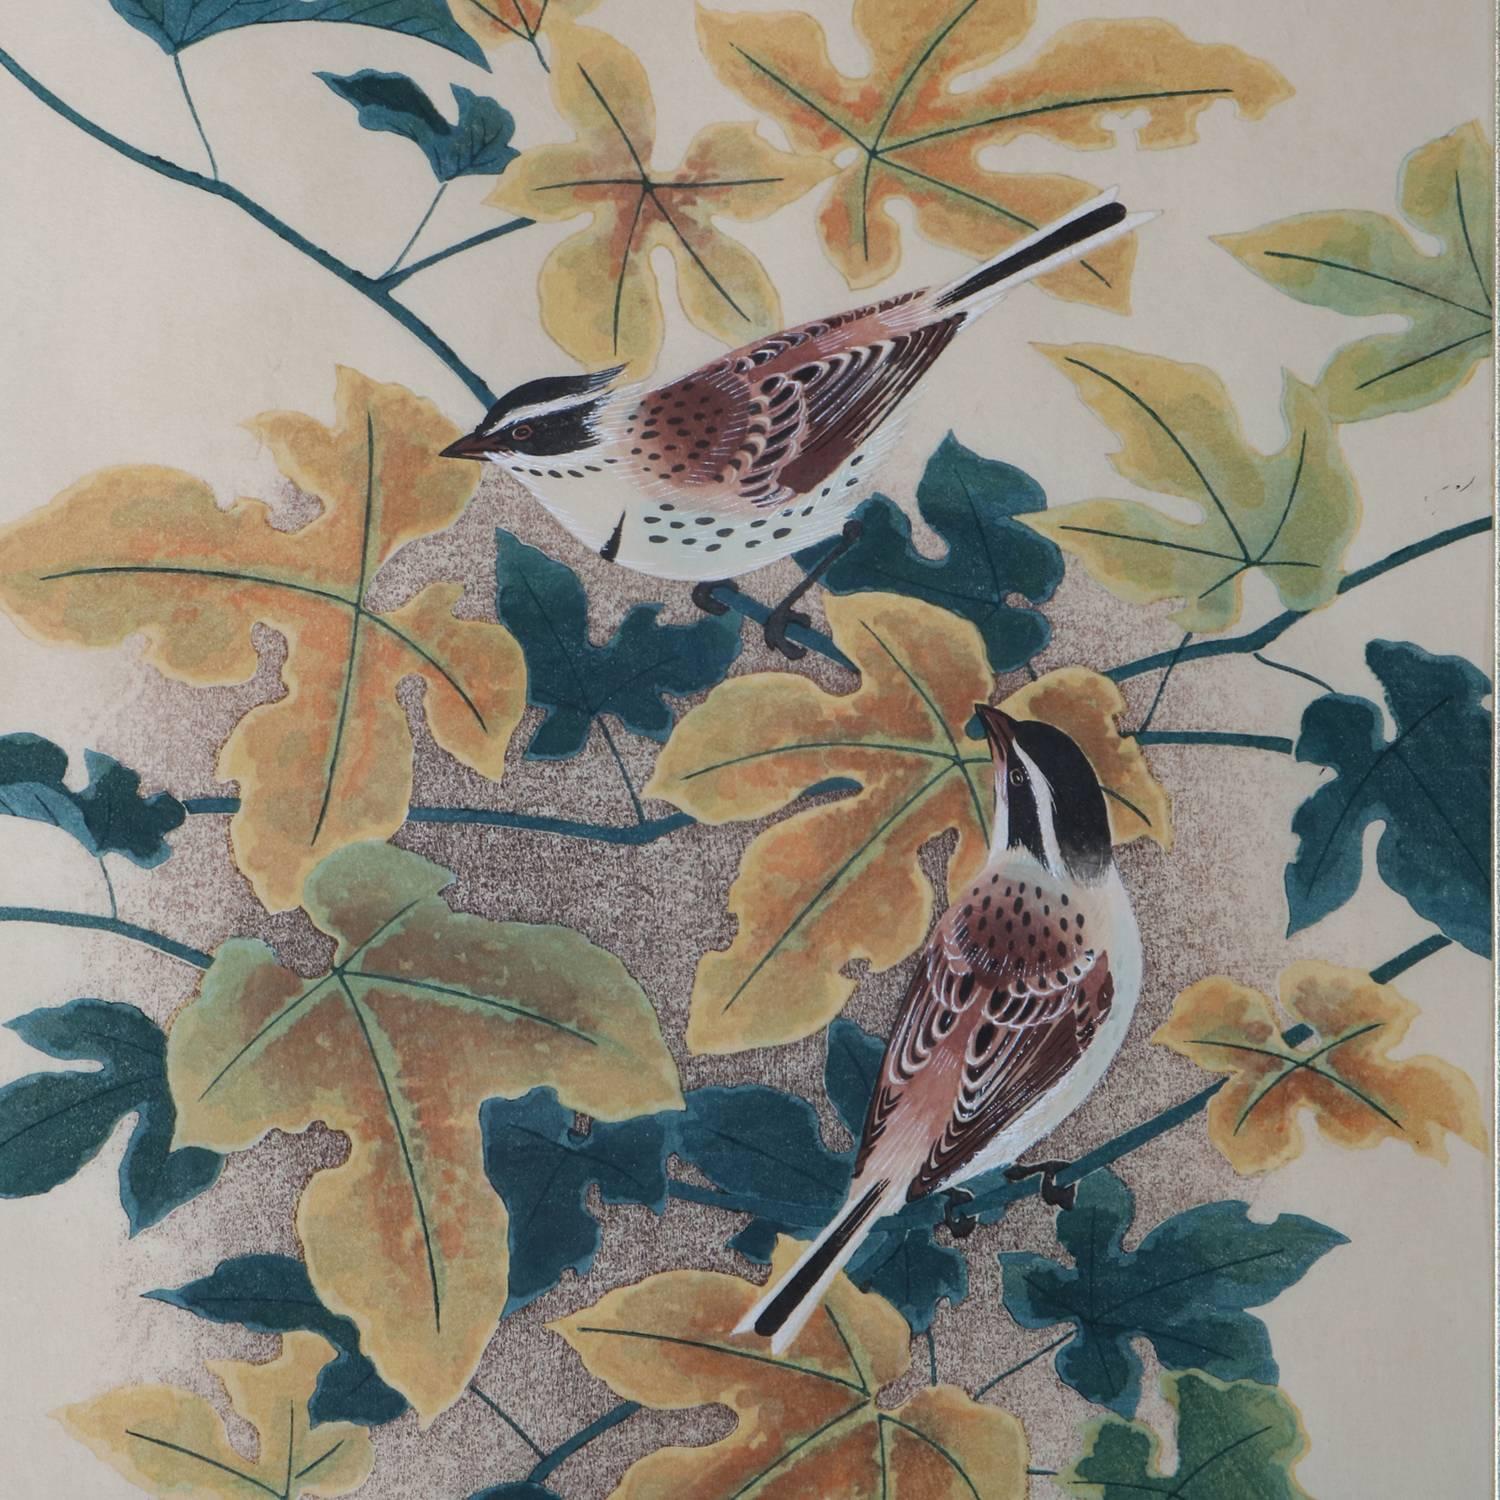 Vintage Pair of Ashikaga Shizuo Japanese floral and avian wood block prints "Birds & Maple" & "Two Sparrows on a Flowering Branch"

Measures - fr: 22" h x 16" w x 1" d, los: 1.5" h x 10" w